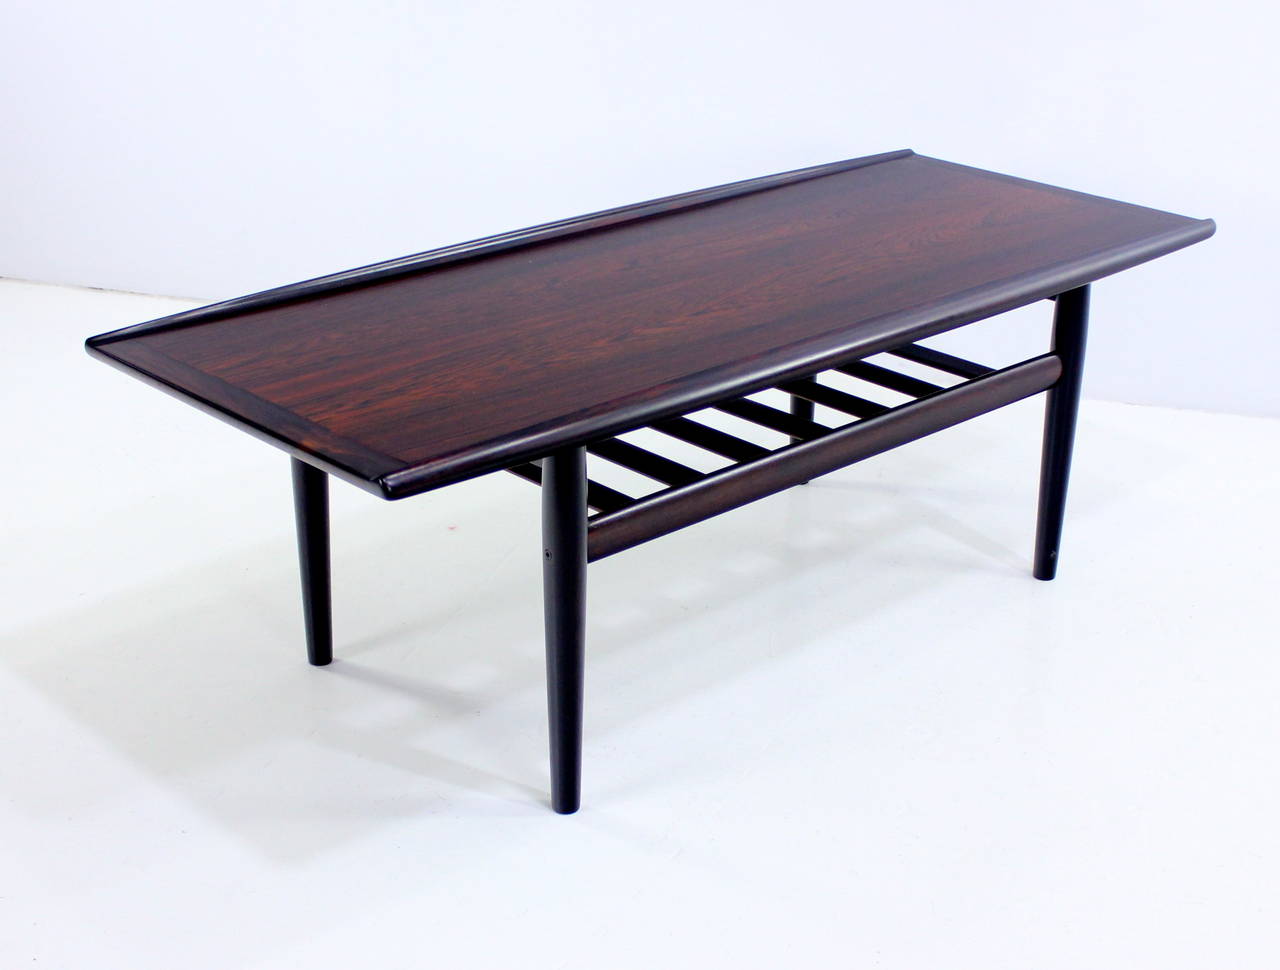 Extraordinary Danish modern coffee table designed by Grete Jalk.
Richly grained rosewood.
Table top has solid, sculptured, upturned edges.
Beautifully slated lower magazine shelf.
Professionally restored and refinished by LookModern.
Matchless